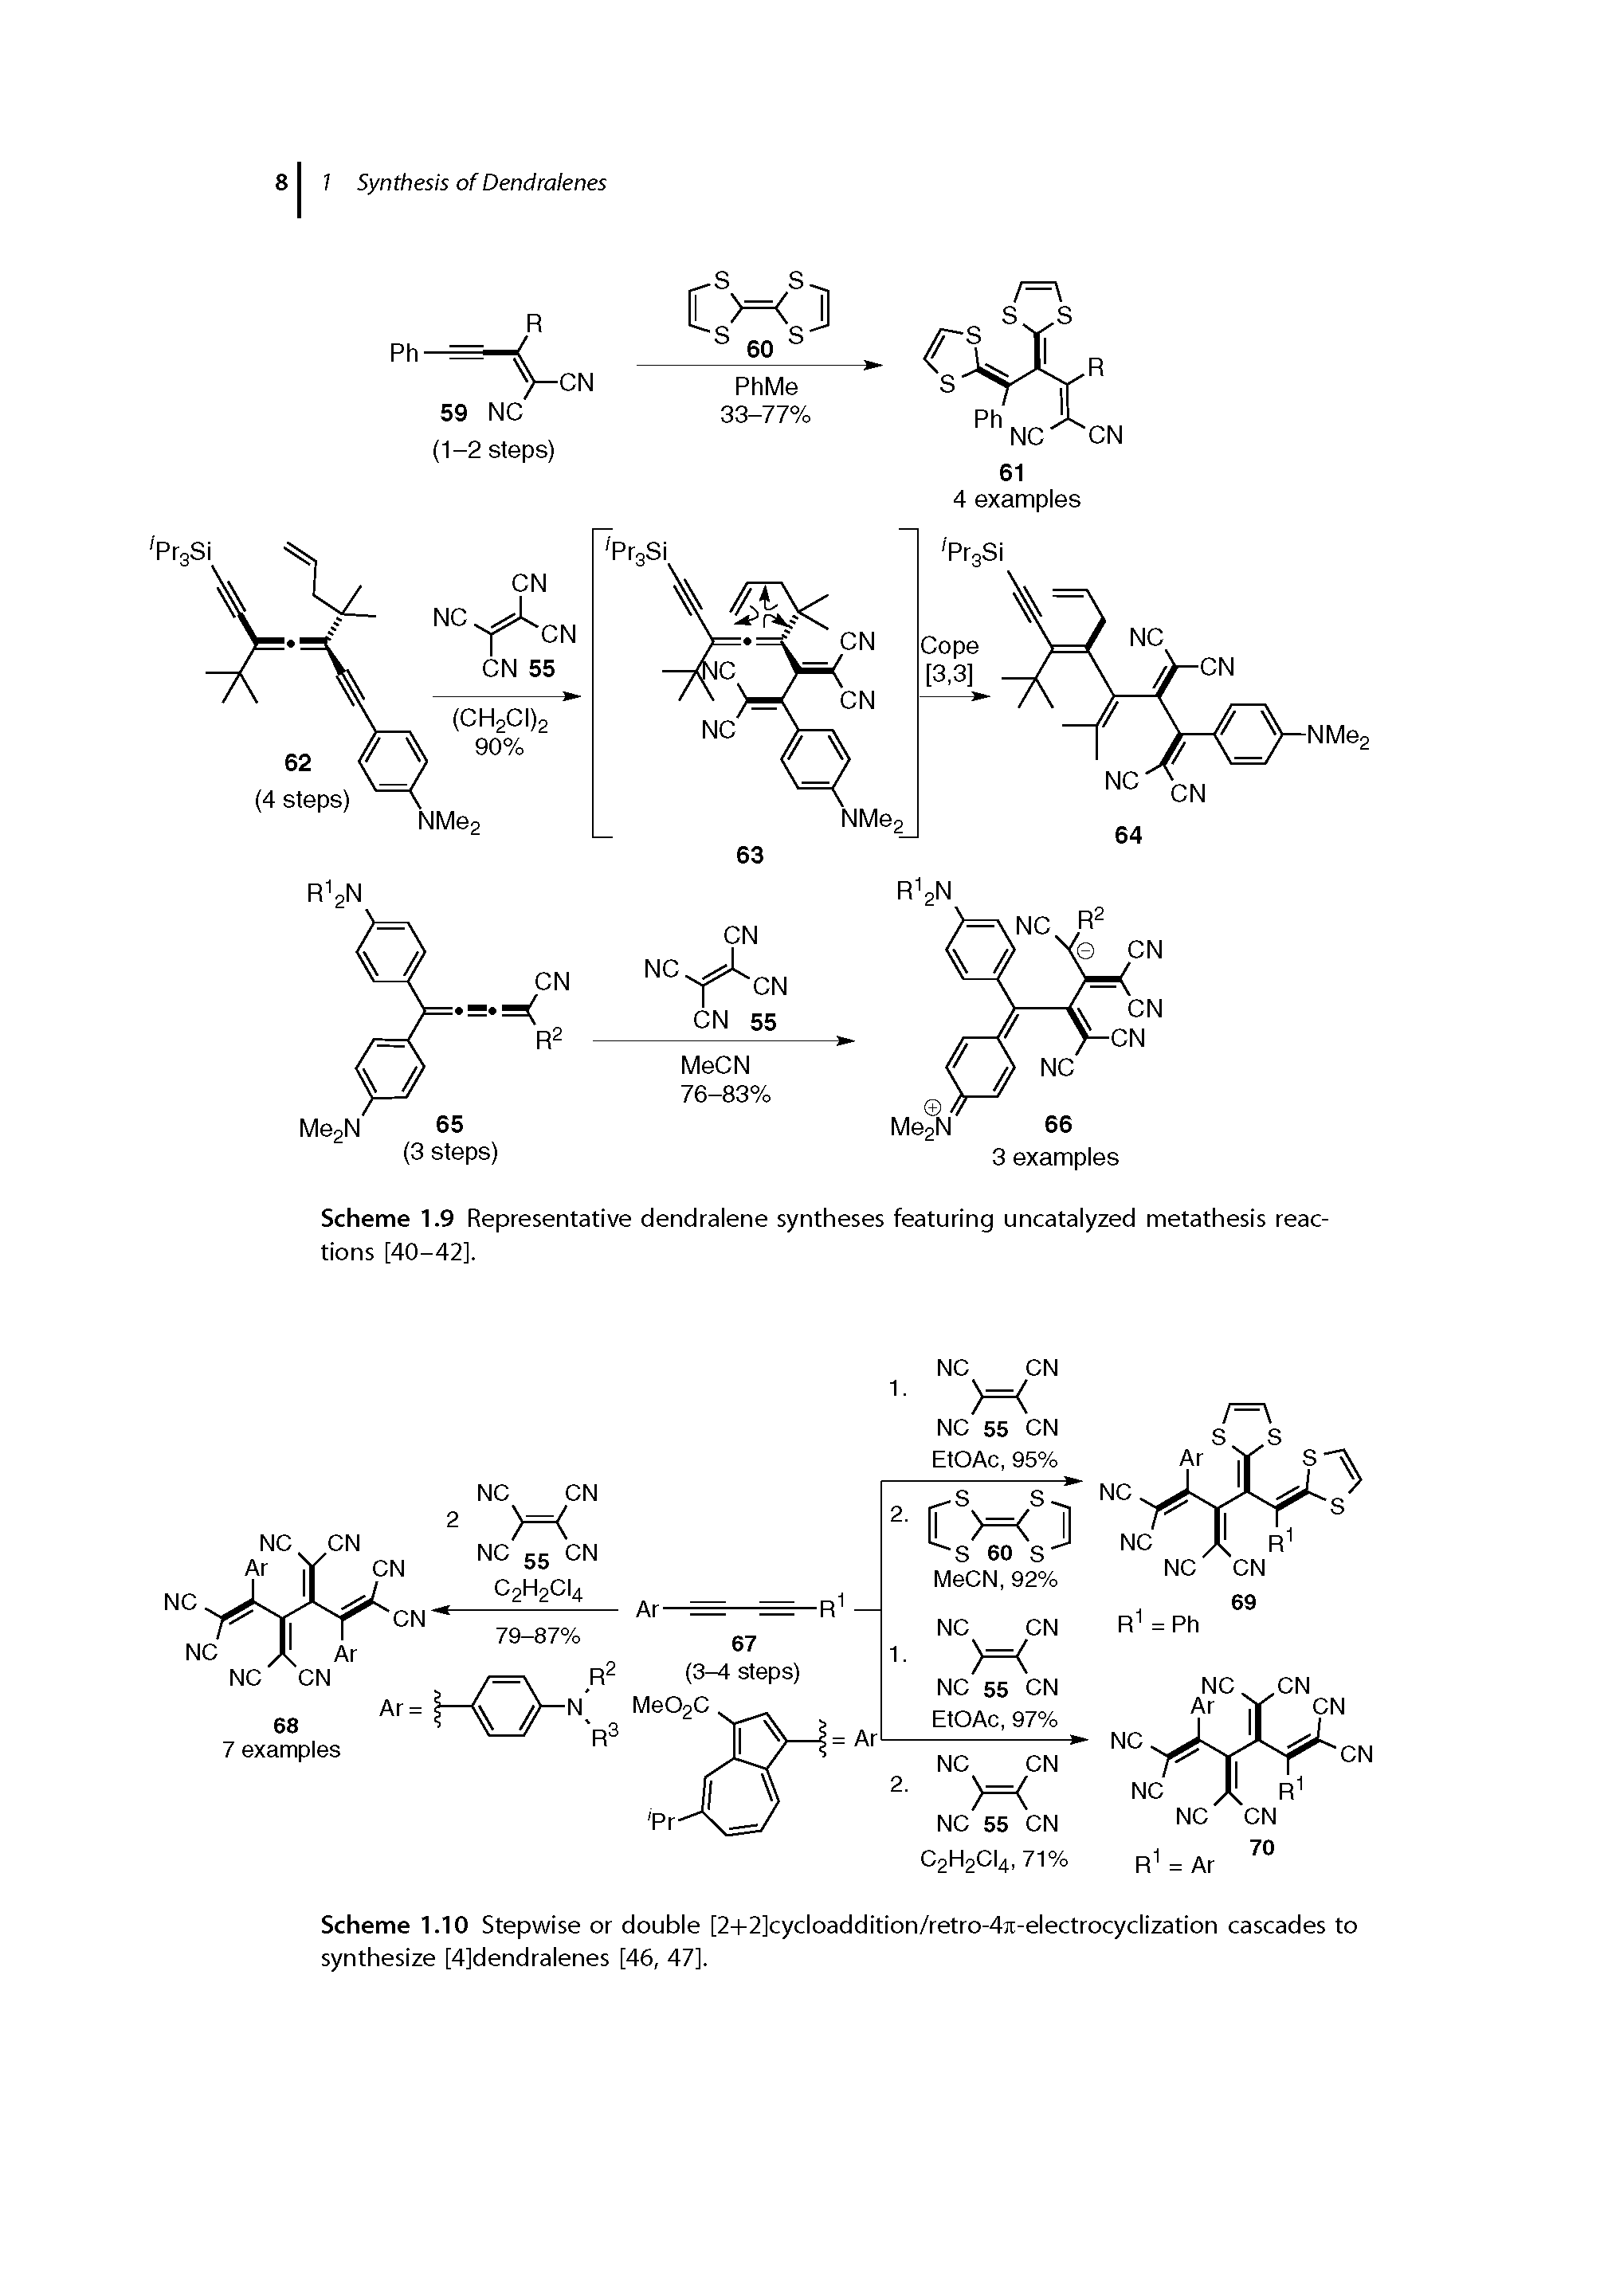 Scheme 1.10 Stepwise or double [2-H2]cycloaddition/retro-4jt-electrocyclization cascades to synthesize [4]dendralenes [46, 47].